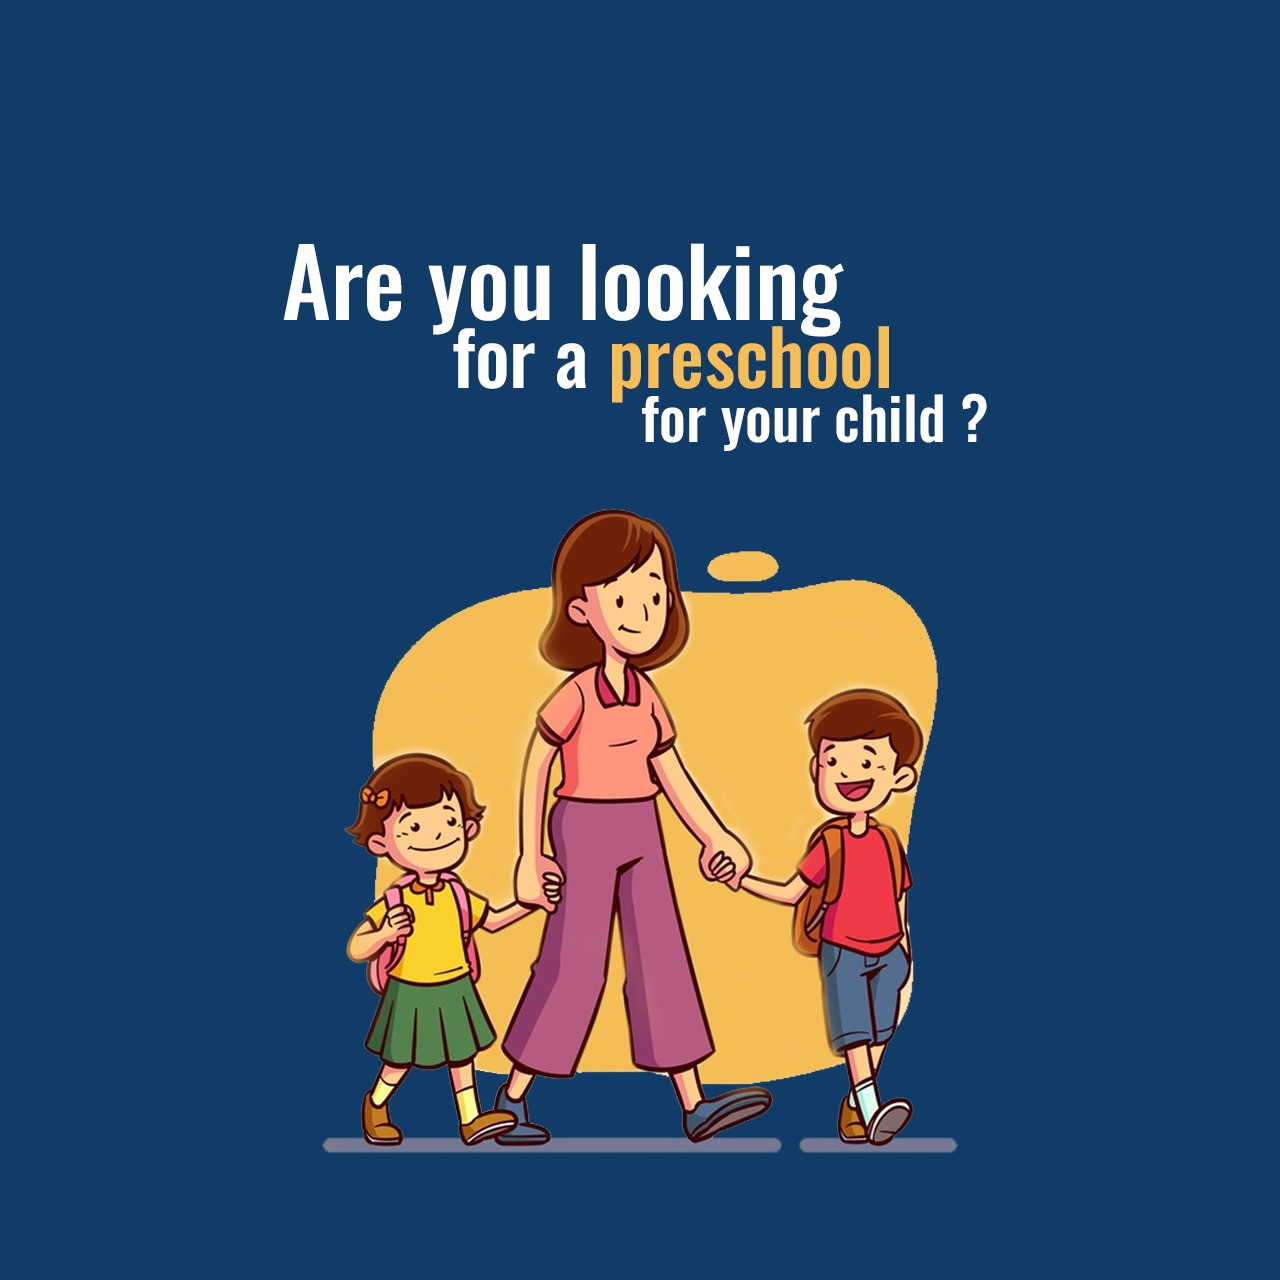 Are You Looking For A Preschool For Your Child?